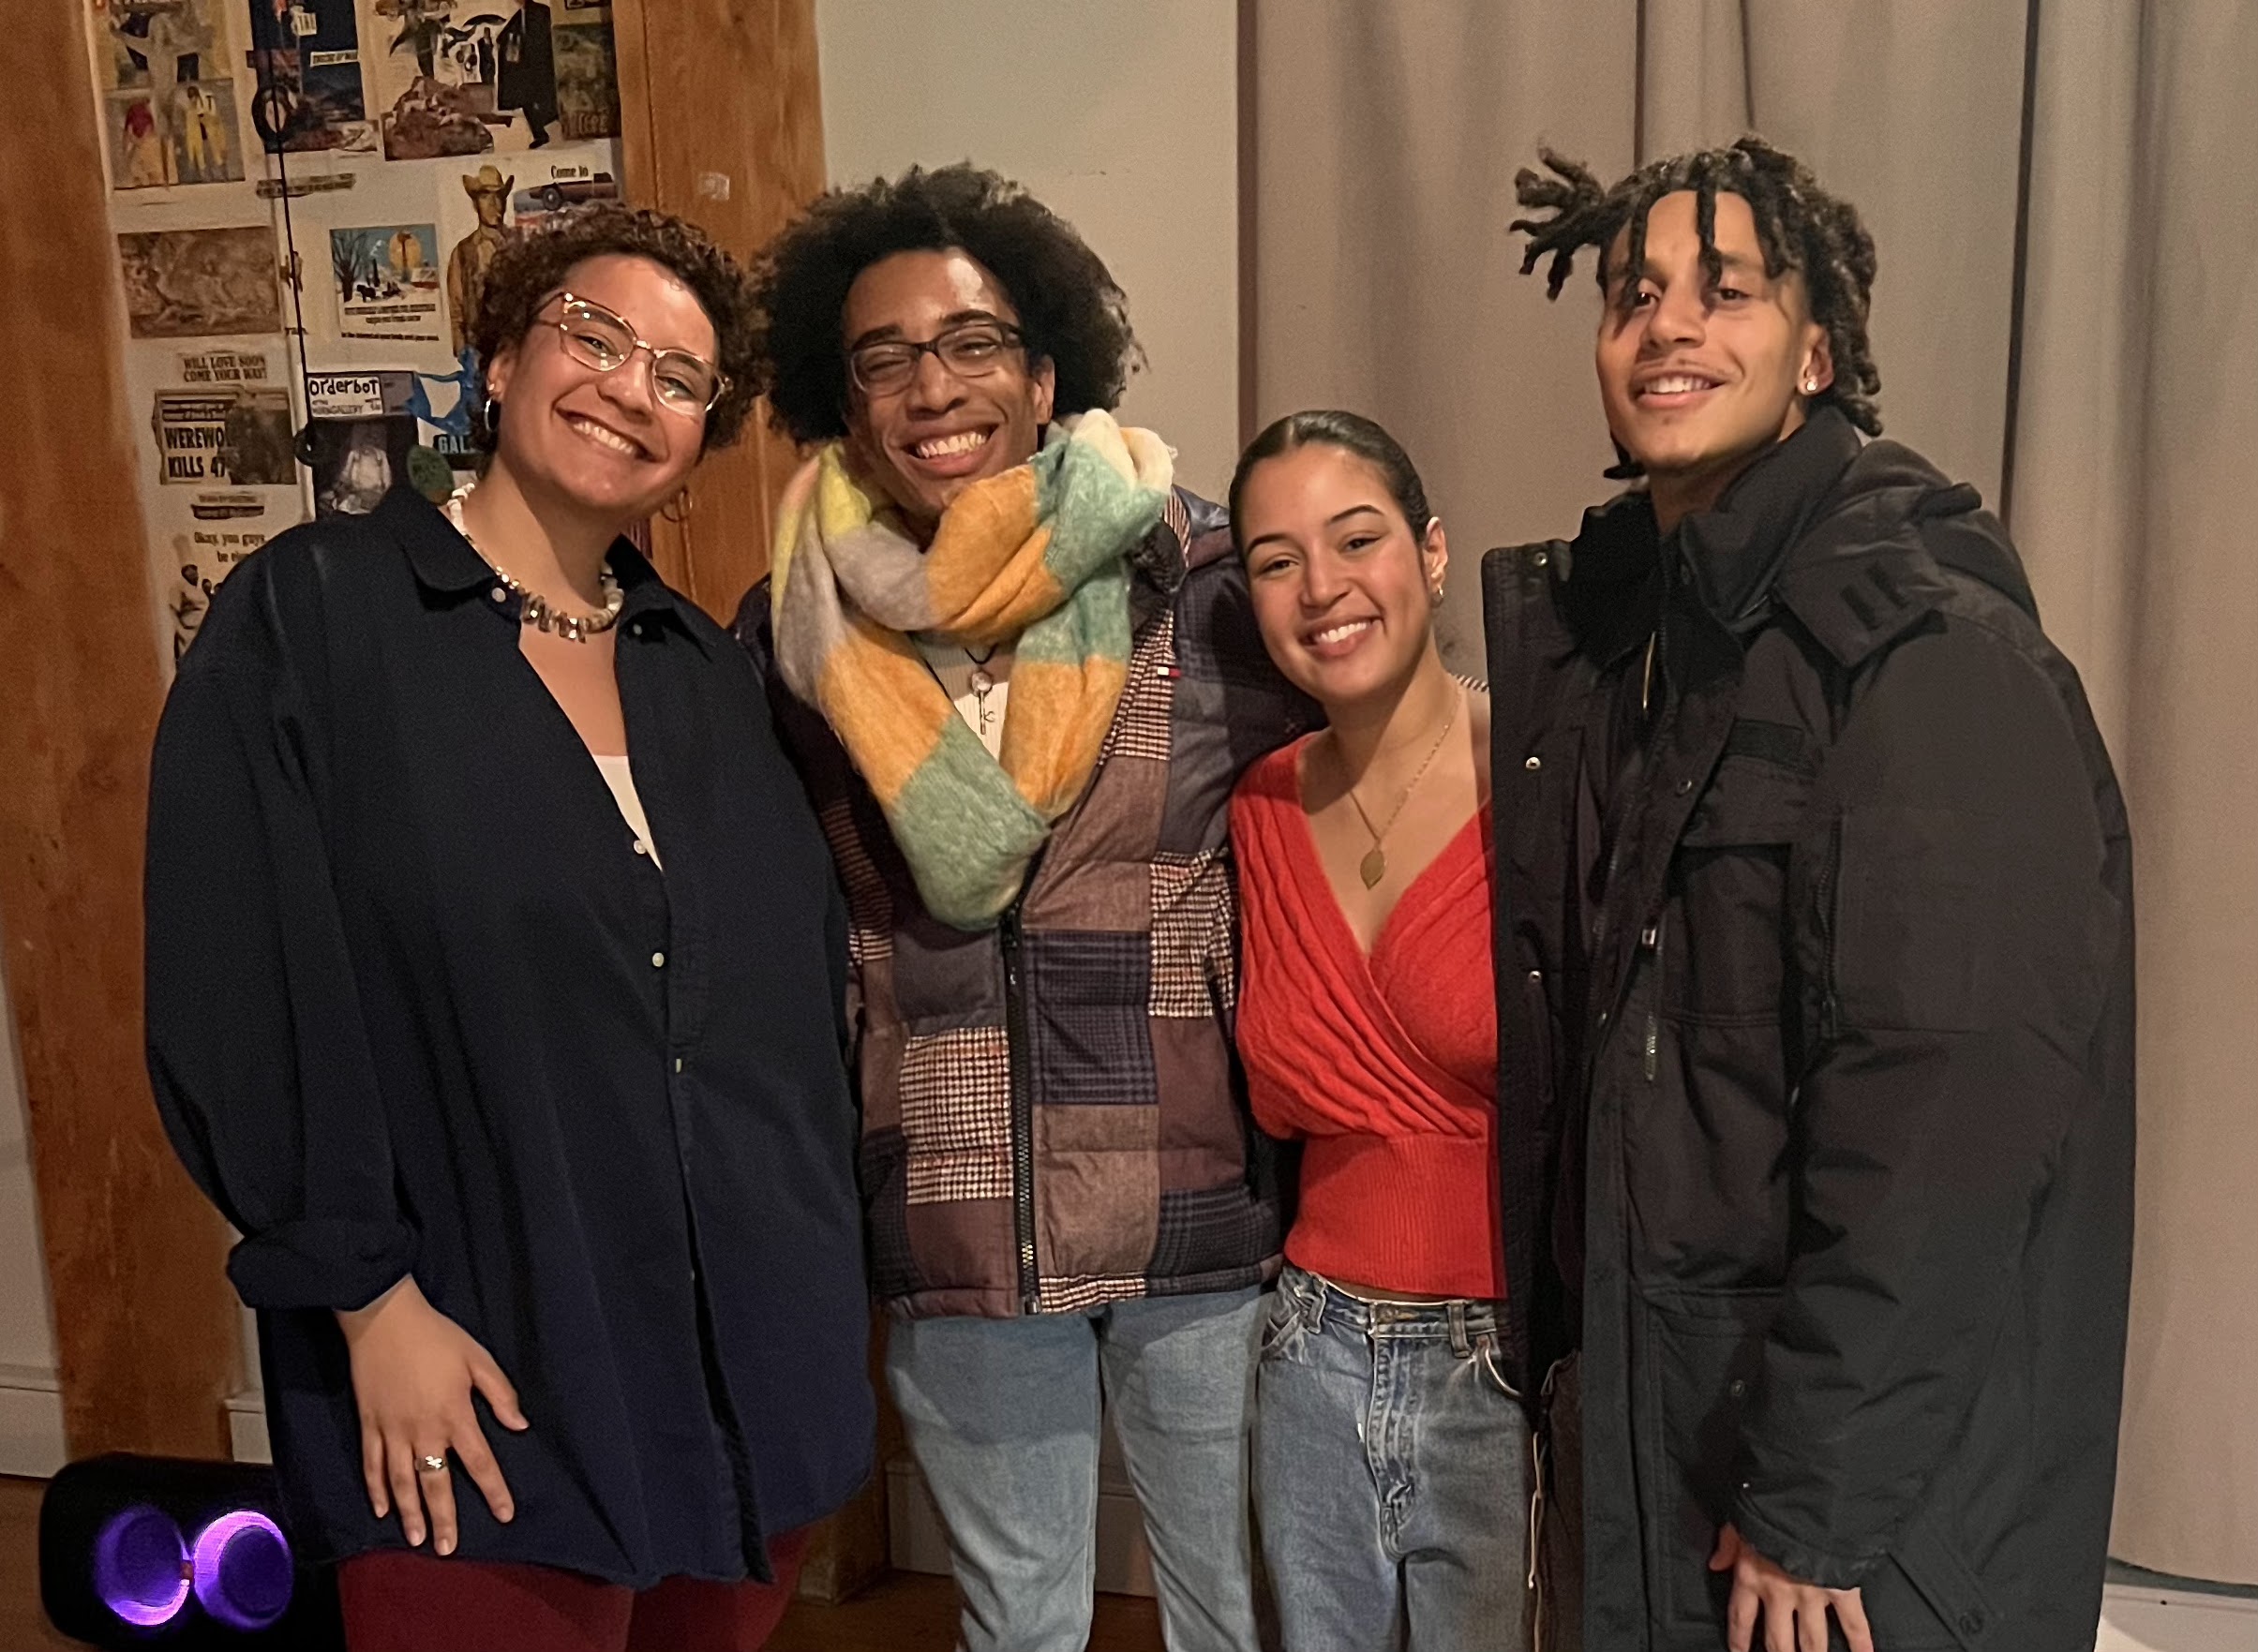 Student poets Angela Futch '24, Juwan Jackson '25, Natalia Mercedes Rodriguez '26 and Antonio J. Gonzalez '25 helped kick off Black History Month last week with “Floetry,” an open-mic night featuring the work of Black artists and authors that was sponsored by the Black Student Union and the Kenyon Review. Photograph by Fernanda Contin '26.